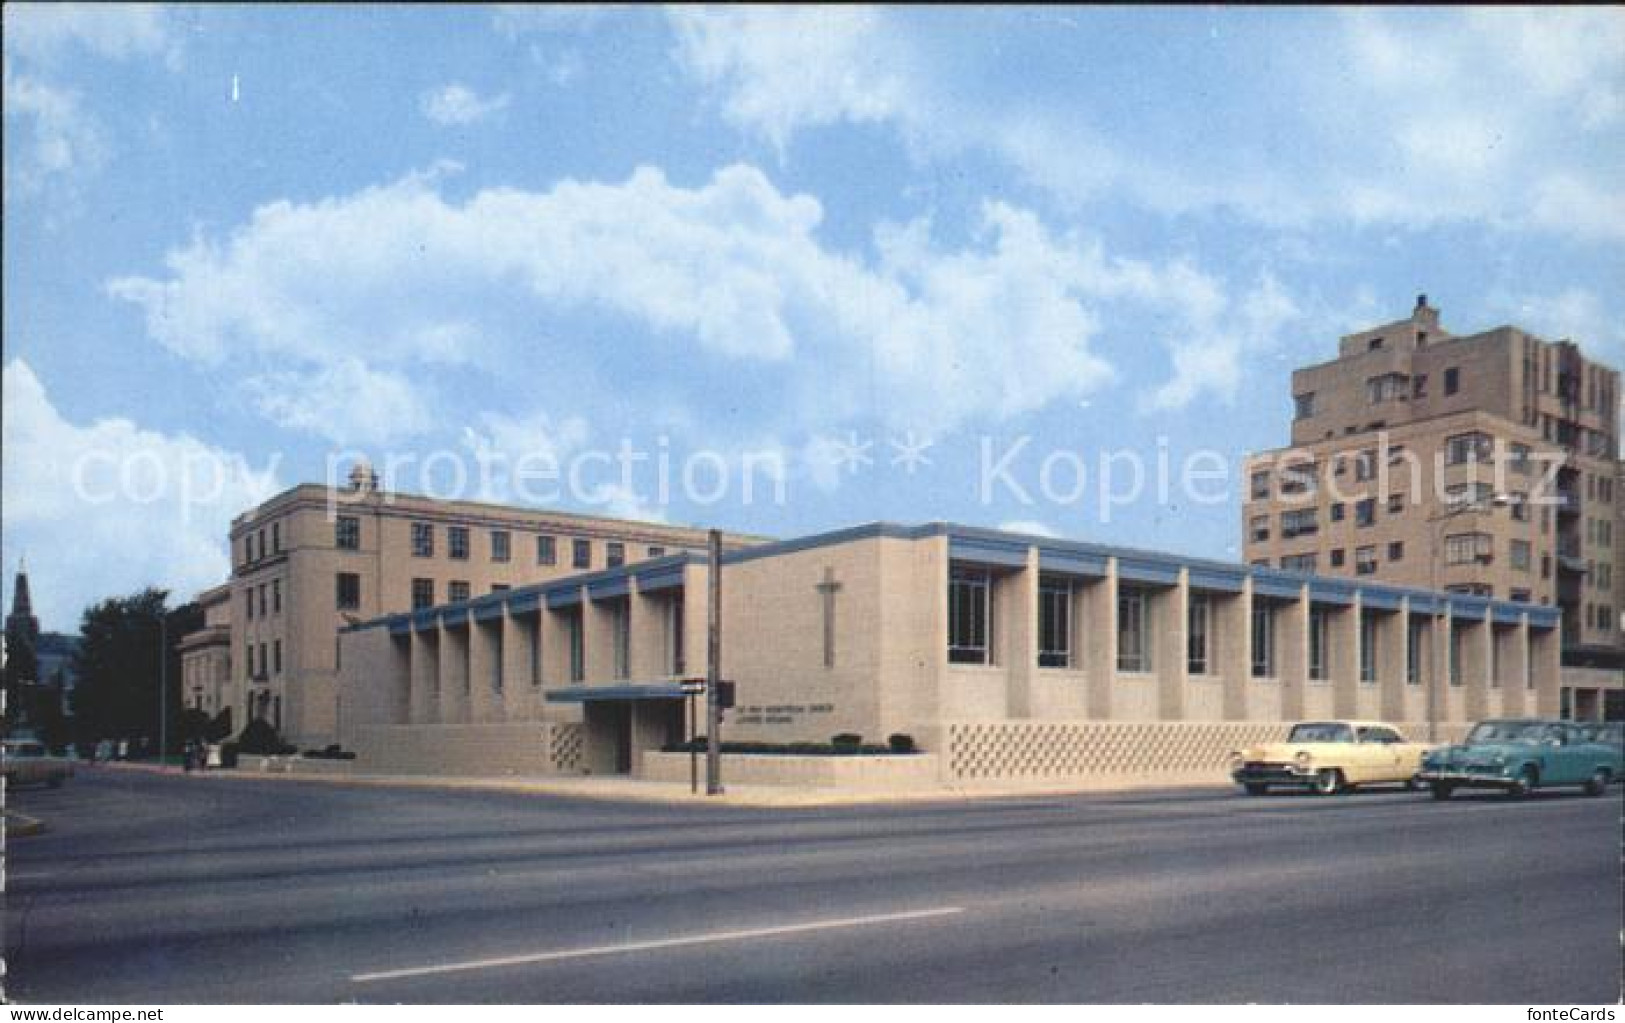 71954731 Charleston_West_Virginia First Presbyterian Church - Other & Unclassified